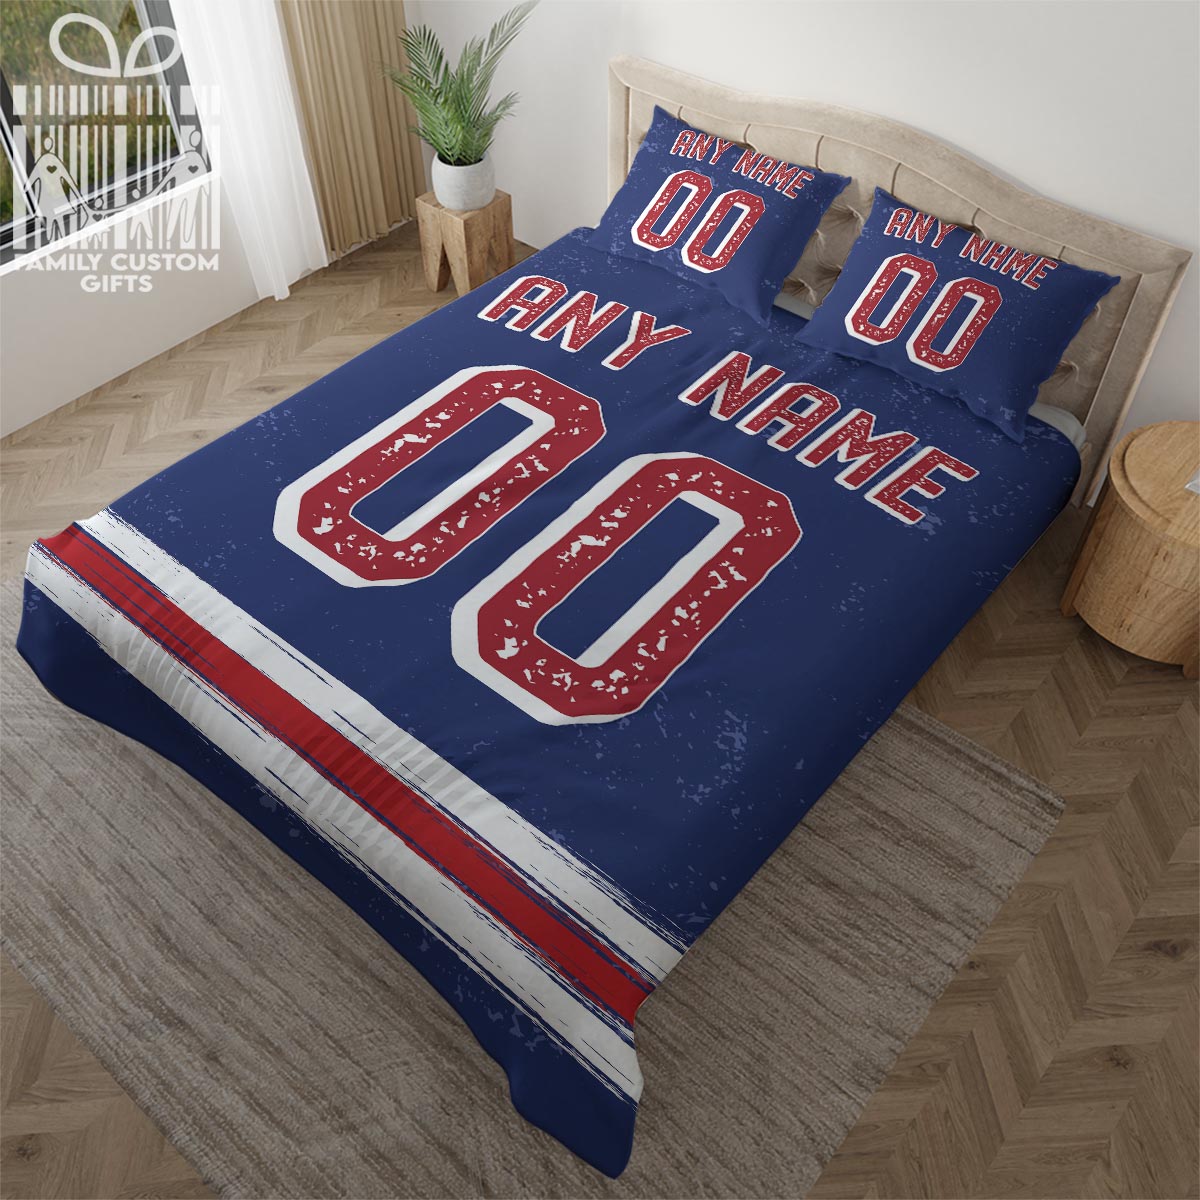 Custom Quilt Sets New York Jersey Personalized Ice hockey Premium Quilt Bedding for Men Women